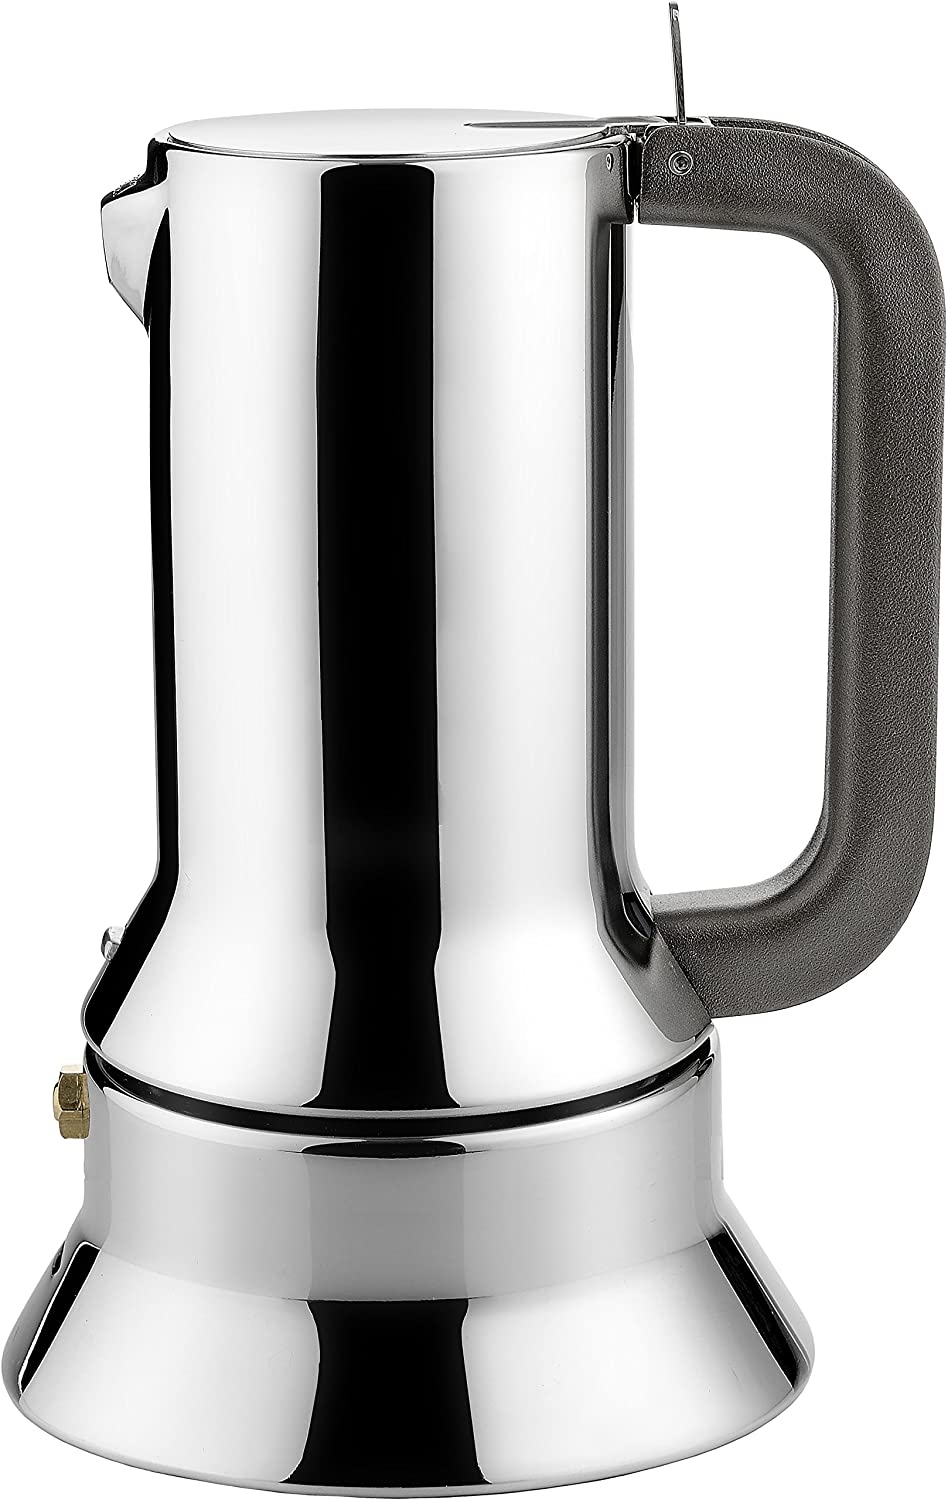 Alessi 6-Cup Espresso Coffee Maker in 18/10 Stainless Steel Mirror Polished with Magnetic Heat Diffusing Bottom